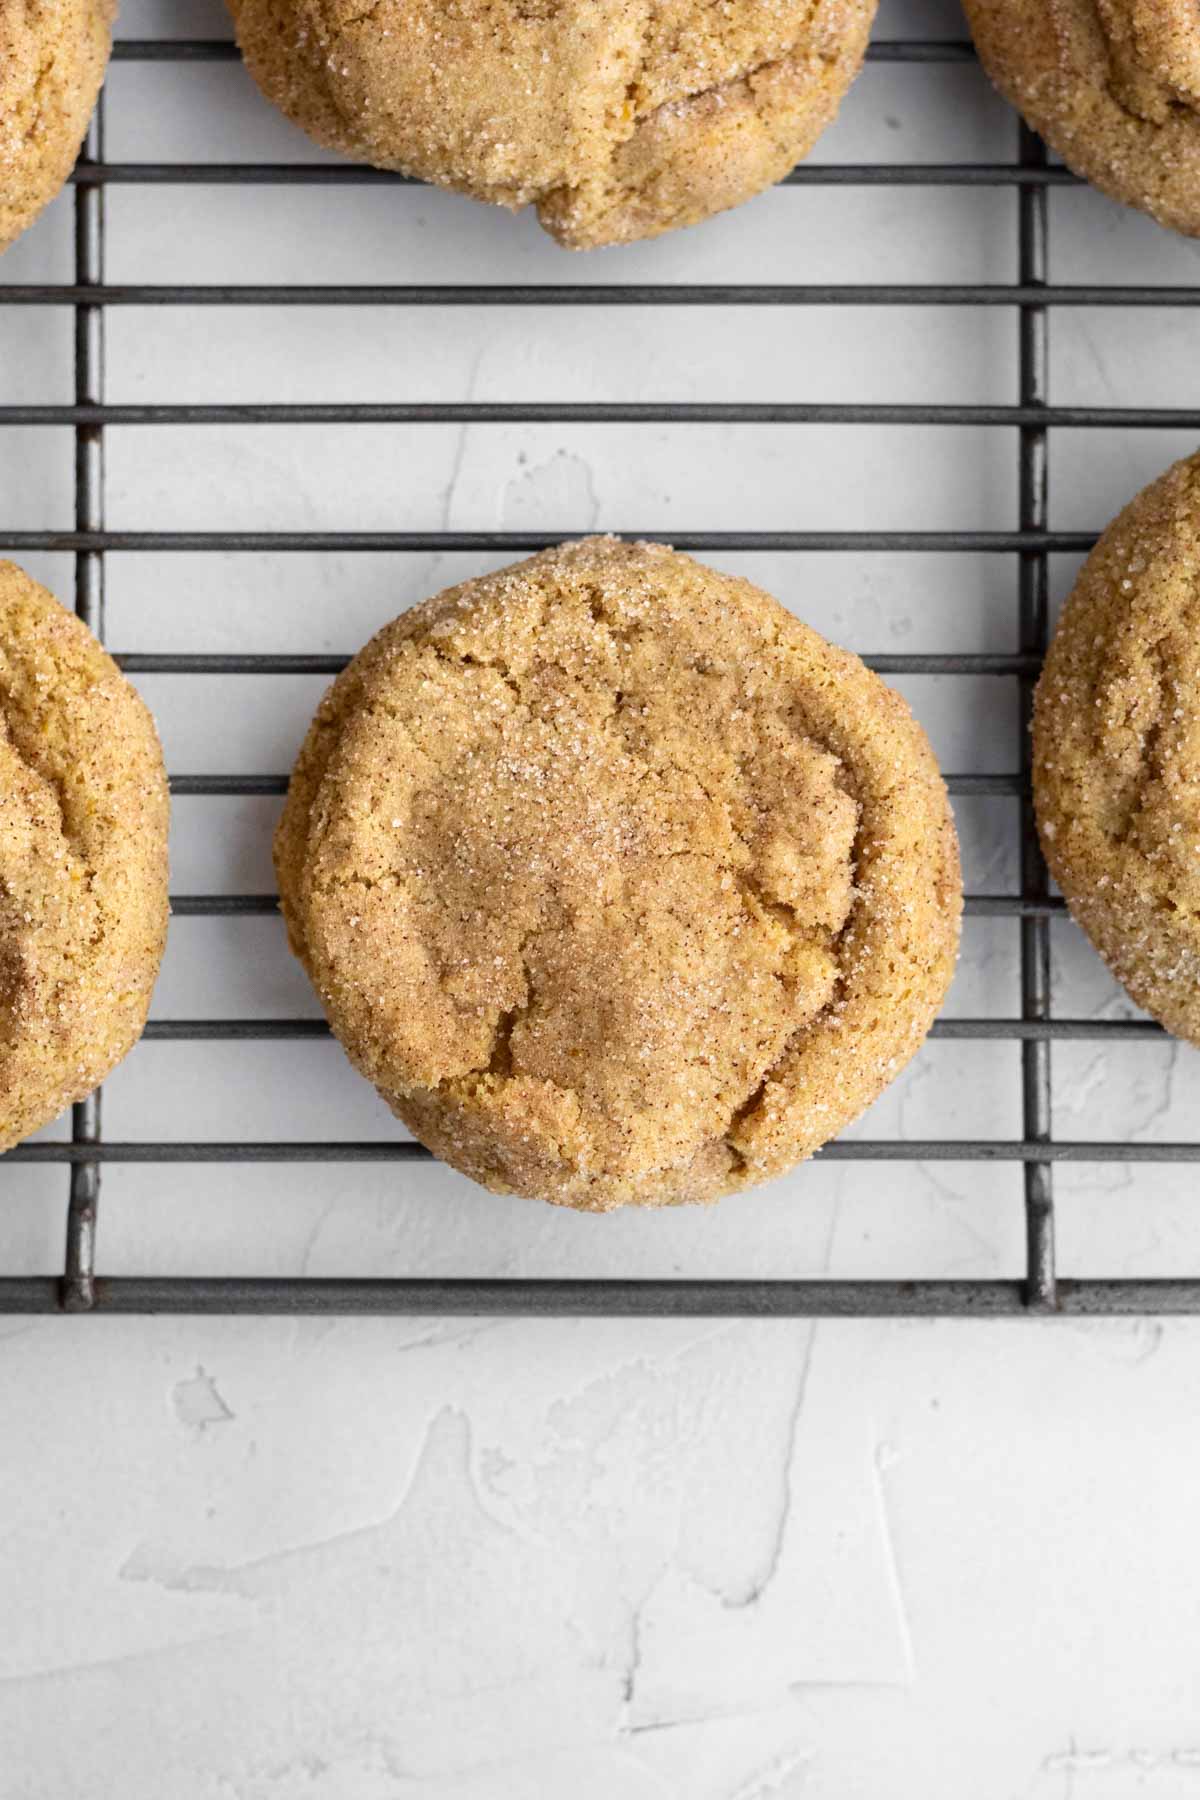 Perfectly baked Pumpkin Snickerdoodle Cookies on a cooling rack.